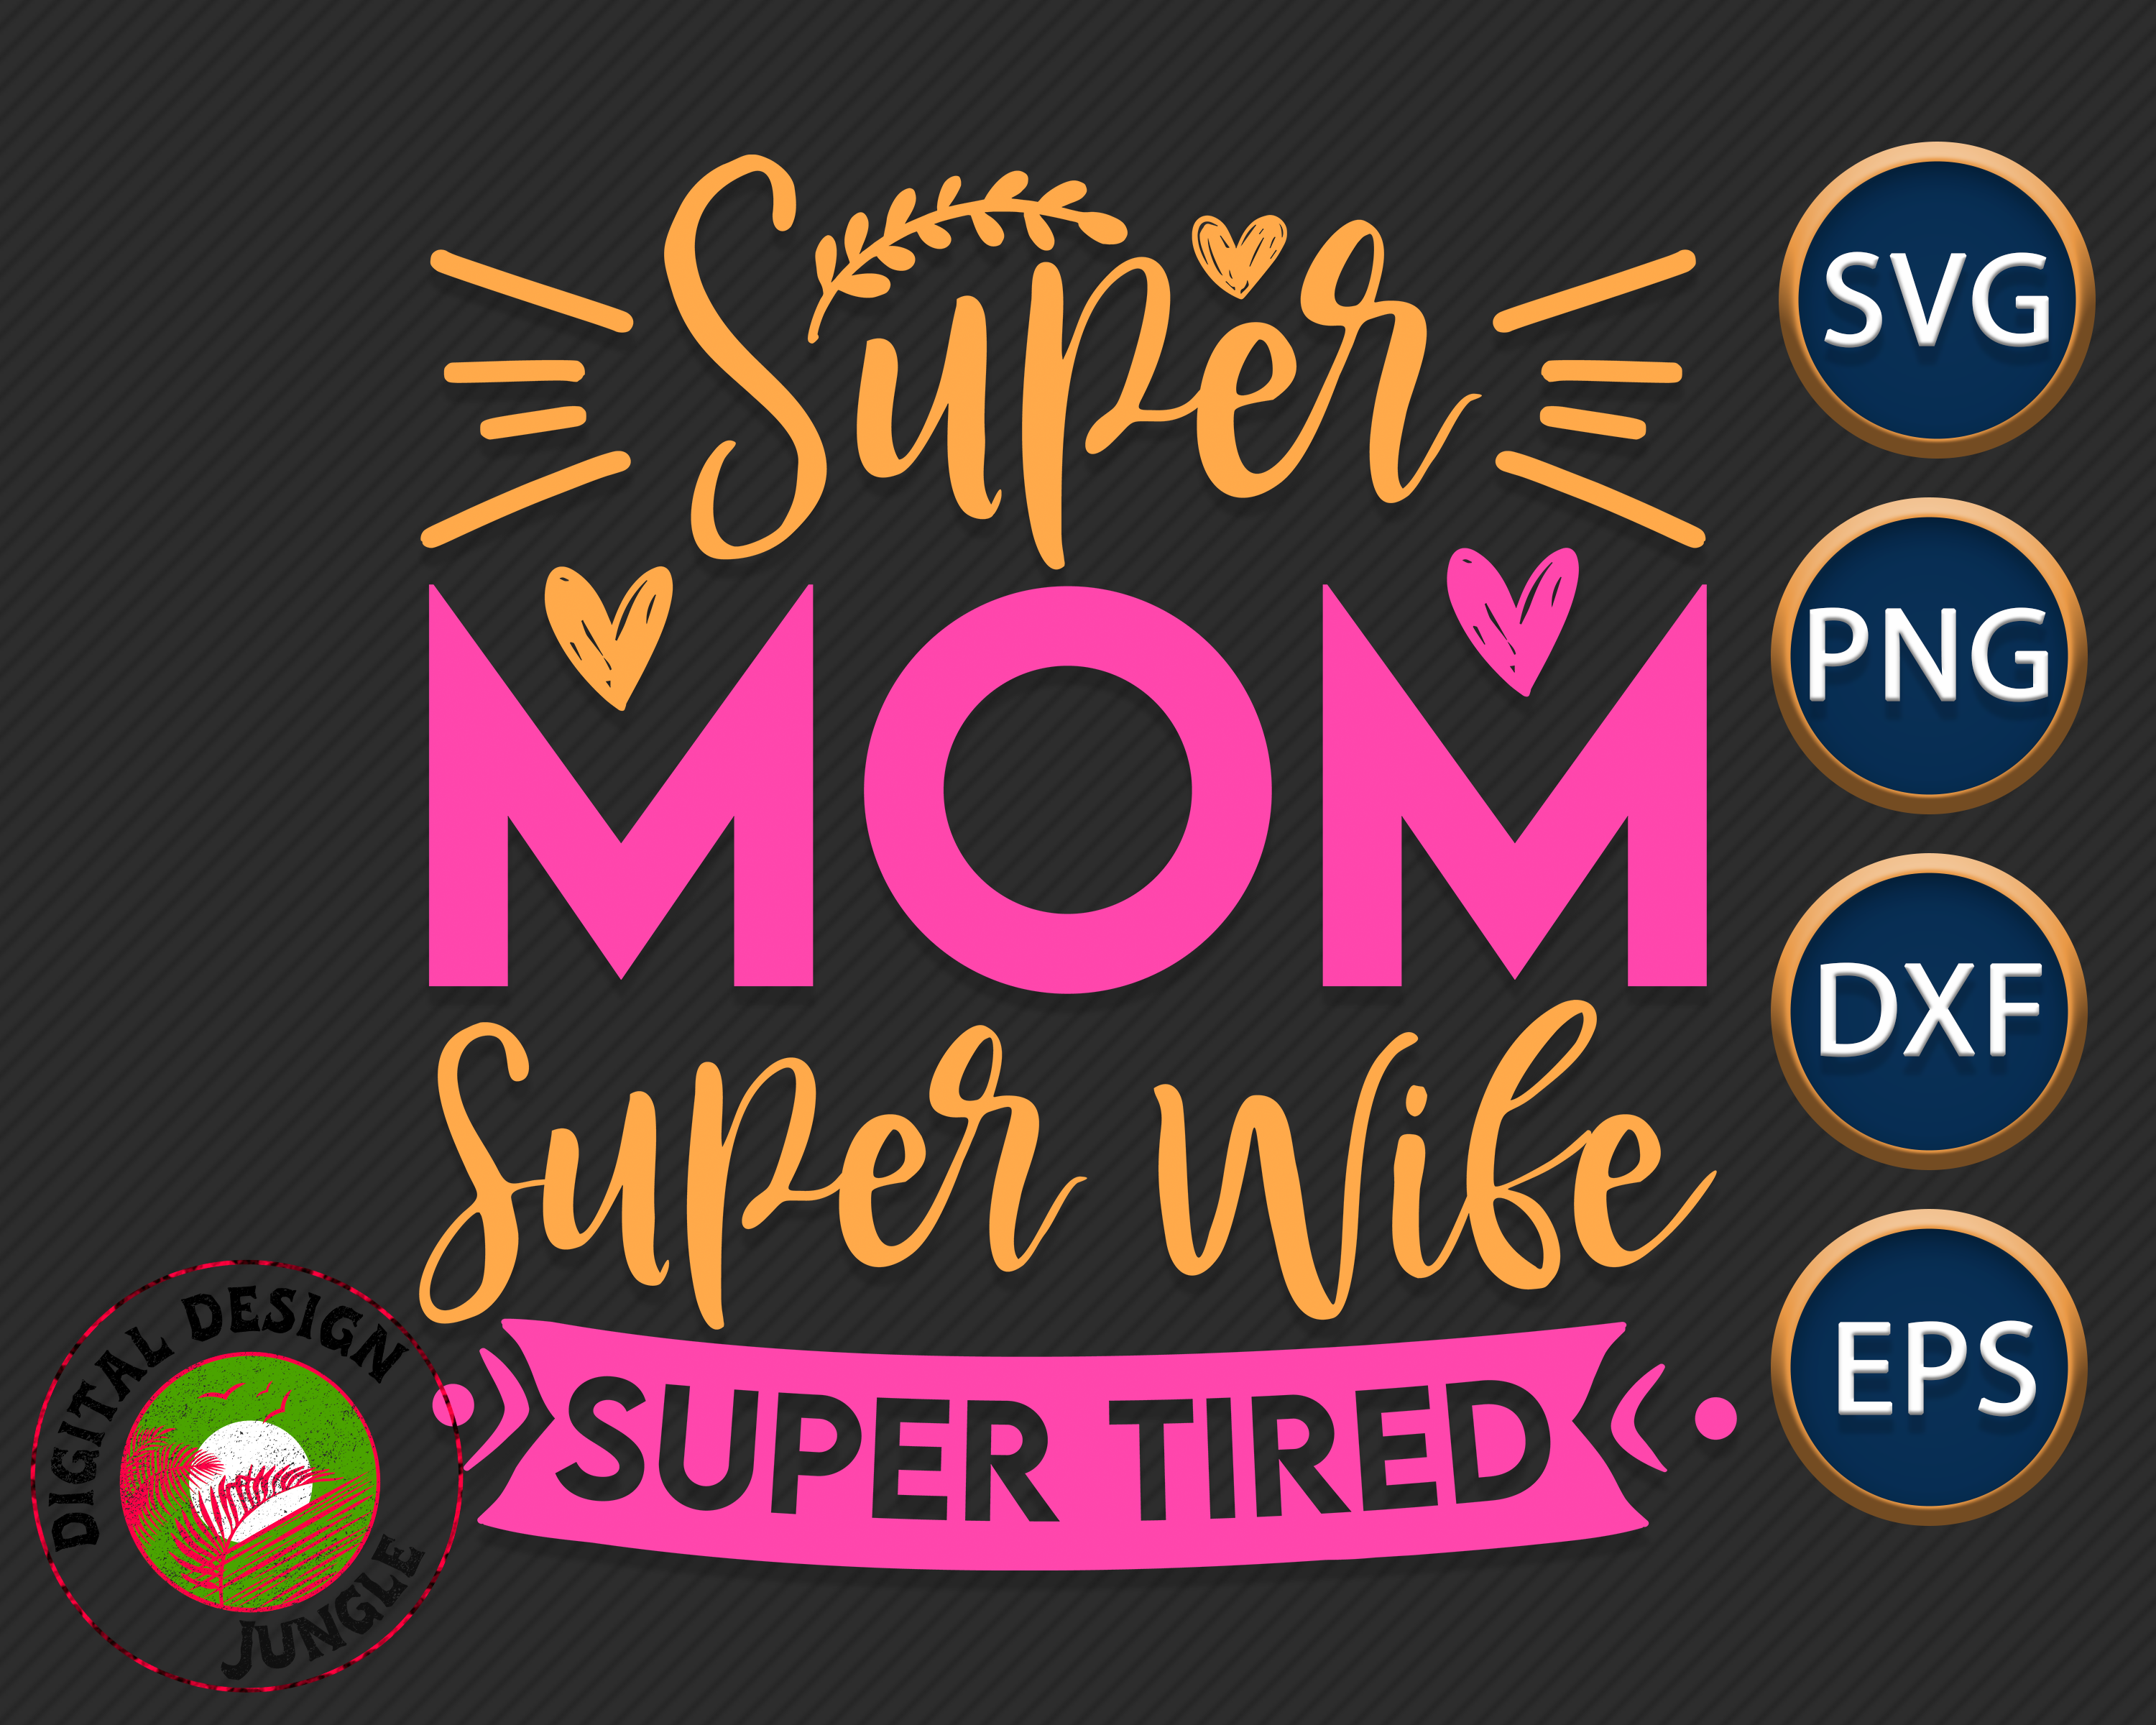 Super Mom, Wife, Tired. Mom Life Quote SVG, Mother's Day Funny Saying By  DesignJungle | TheHungryJPEG